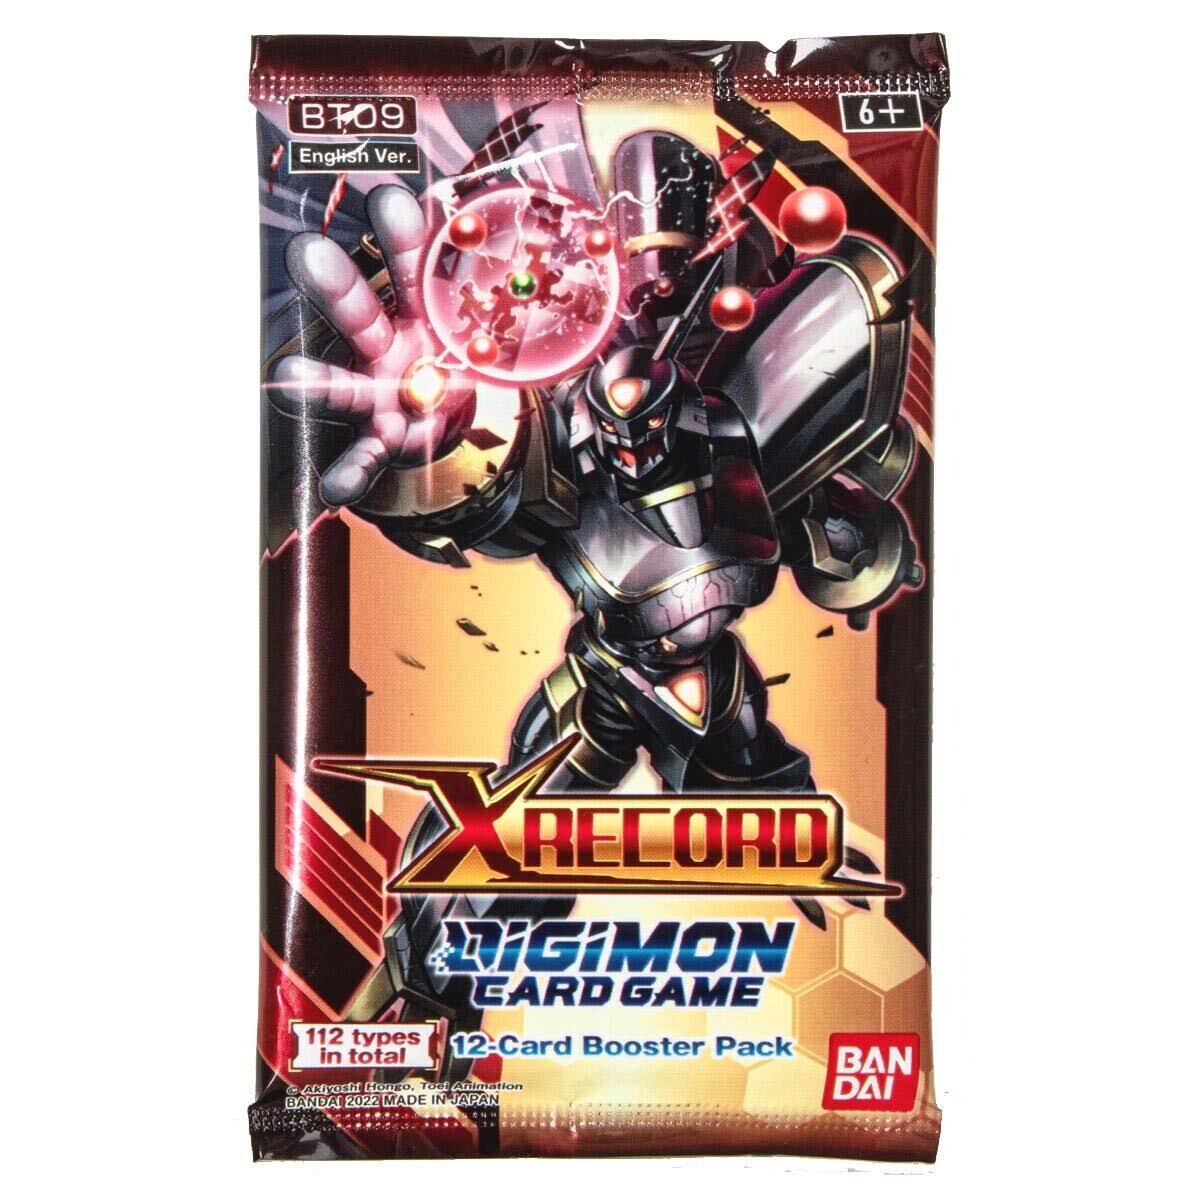 Digimon Card Game - X Record BT09 - Booster Pack